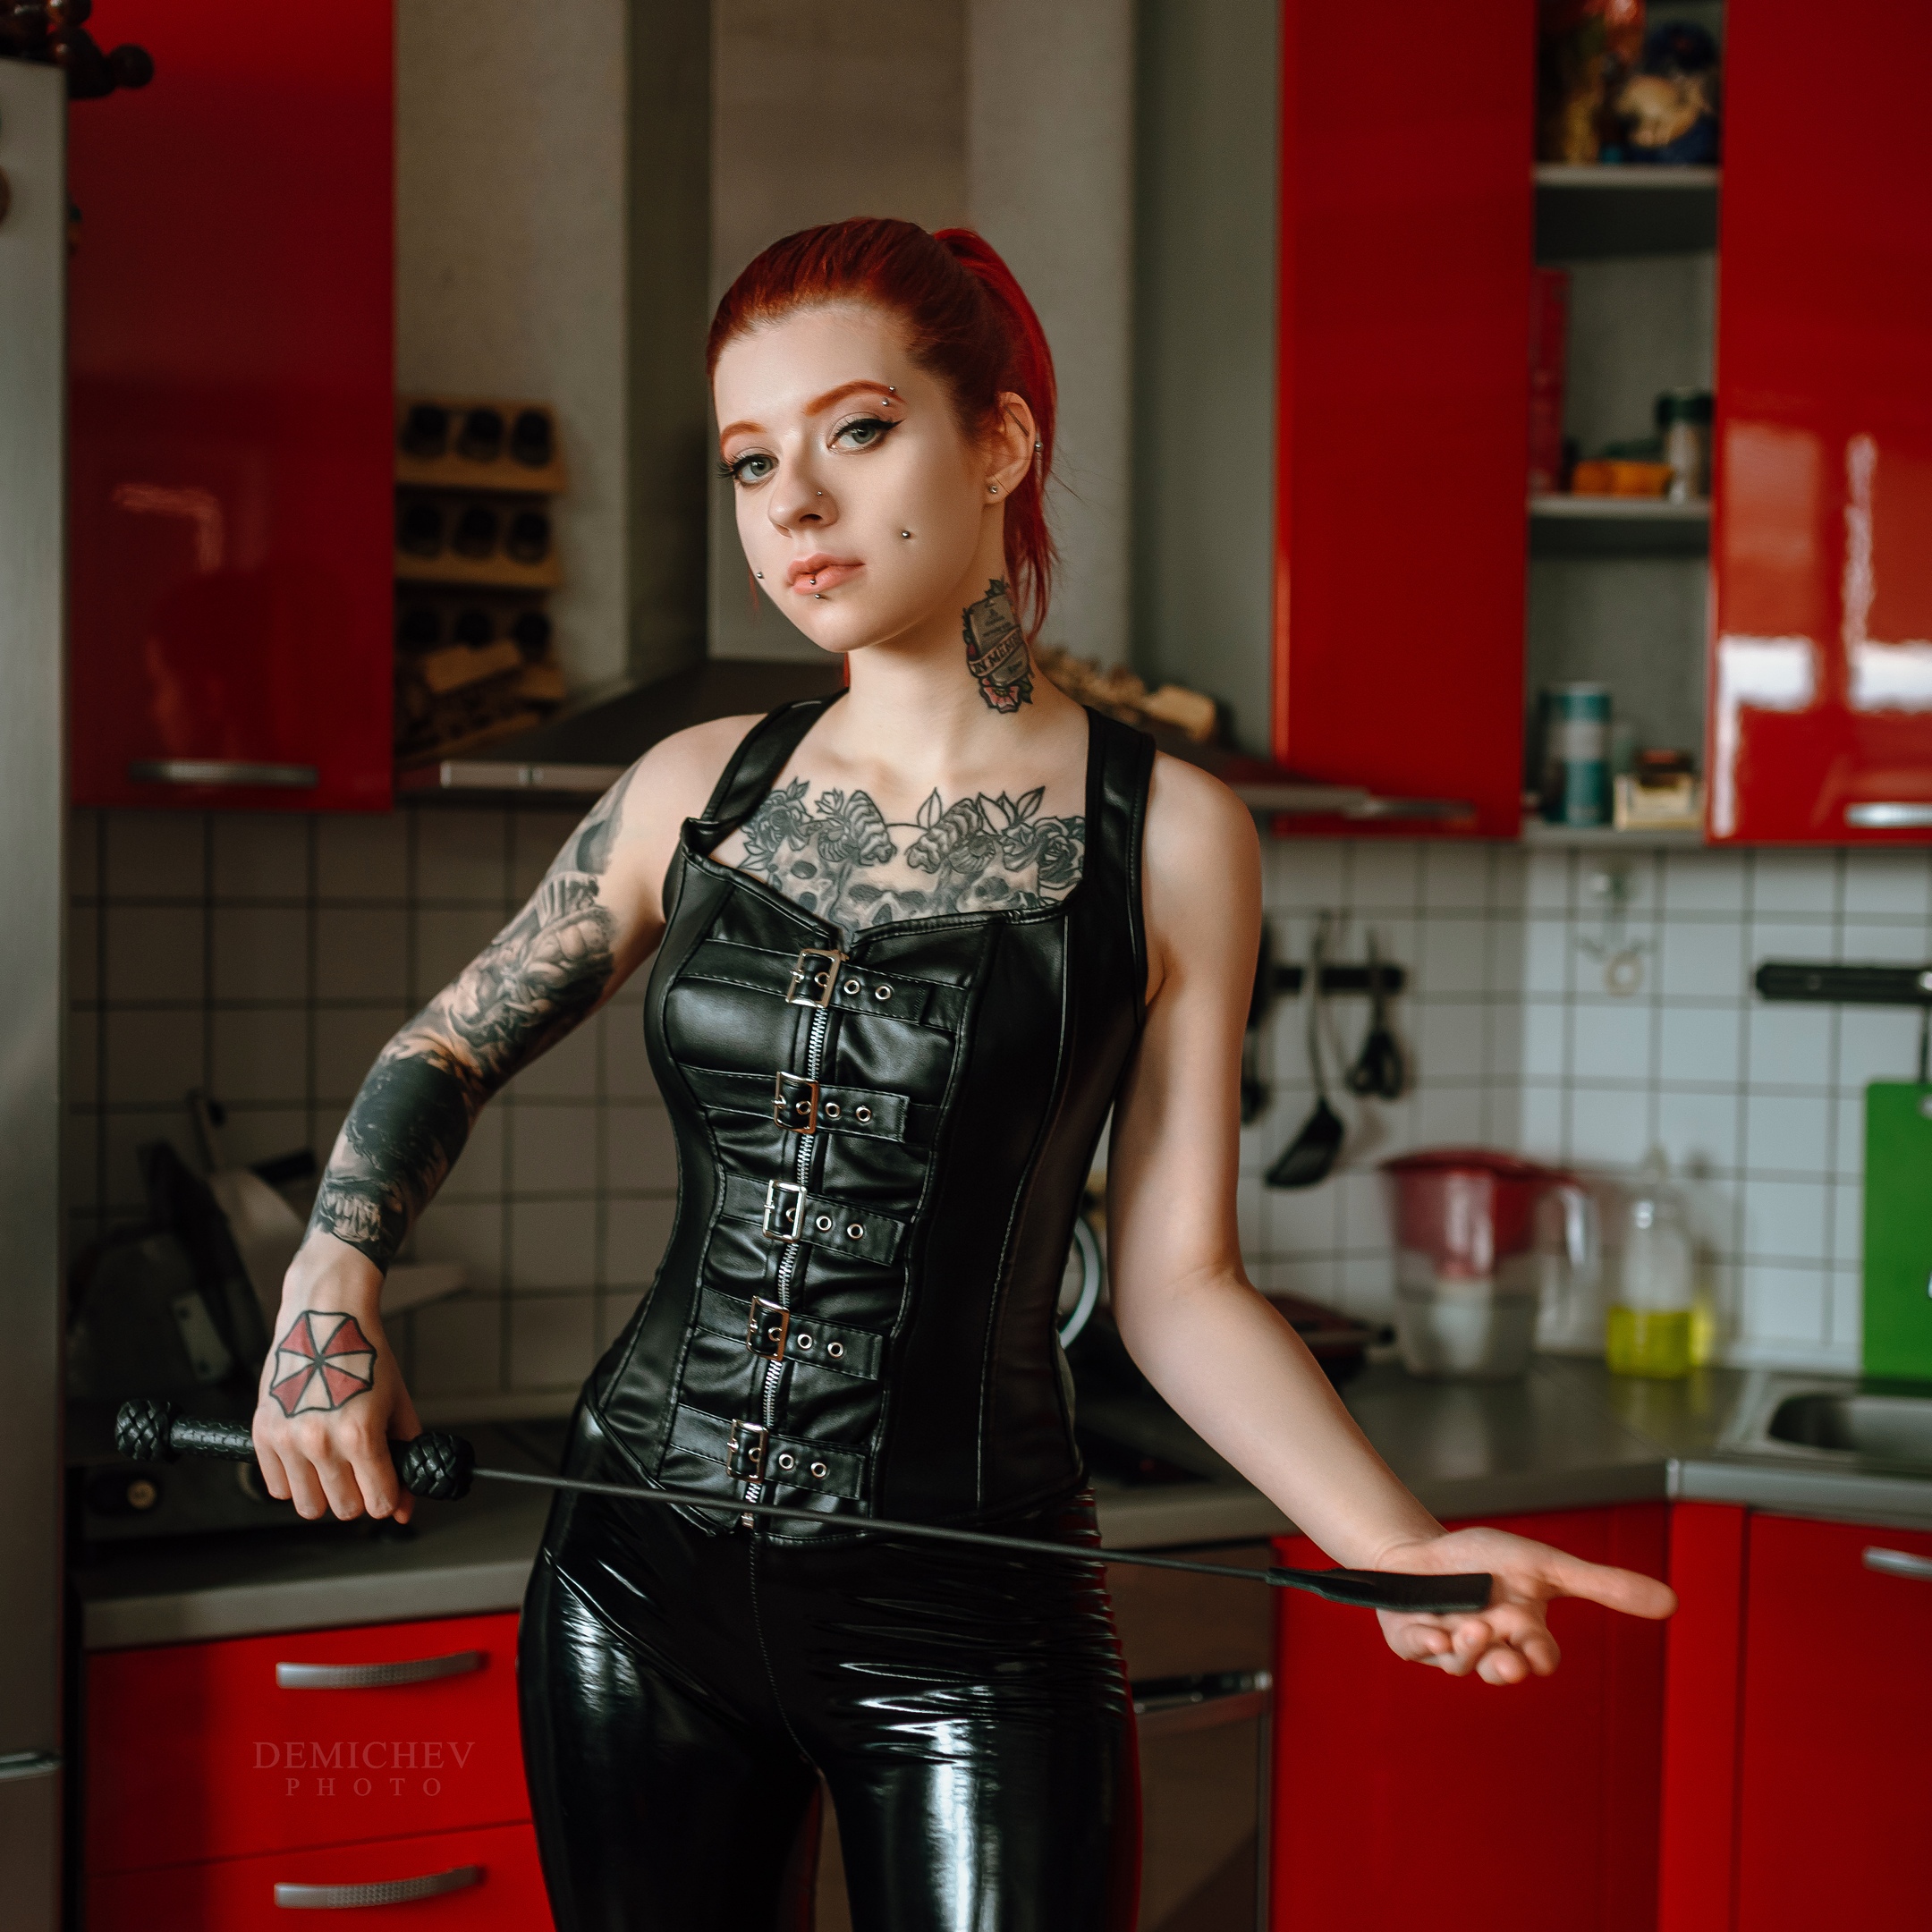 People 2160x2160 Petr Demichev women model leather piercing corset redhead kitchen women indoors looking at viewer inked girls pierced lip Vera Faith riding crops watermarked